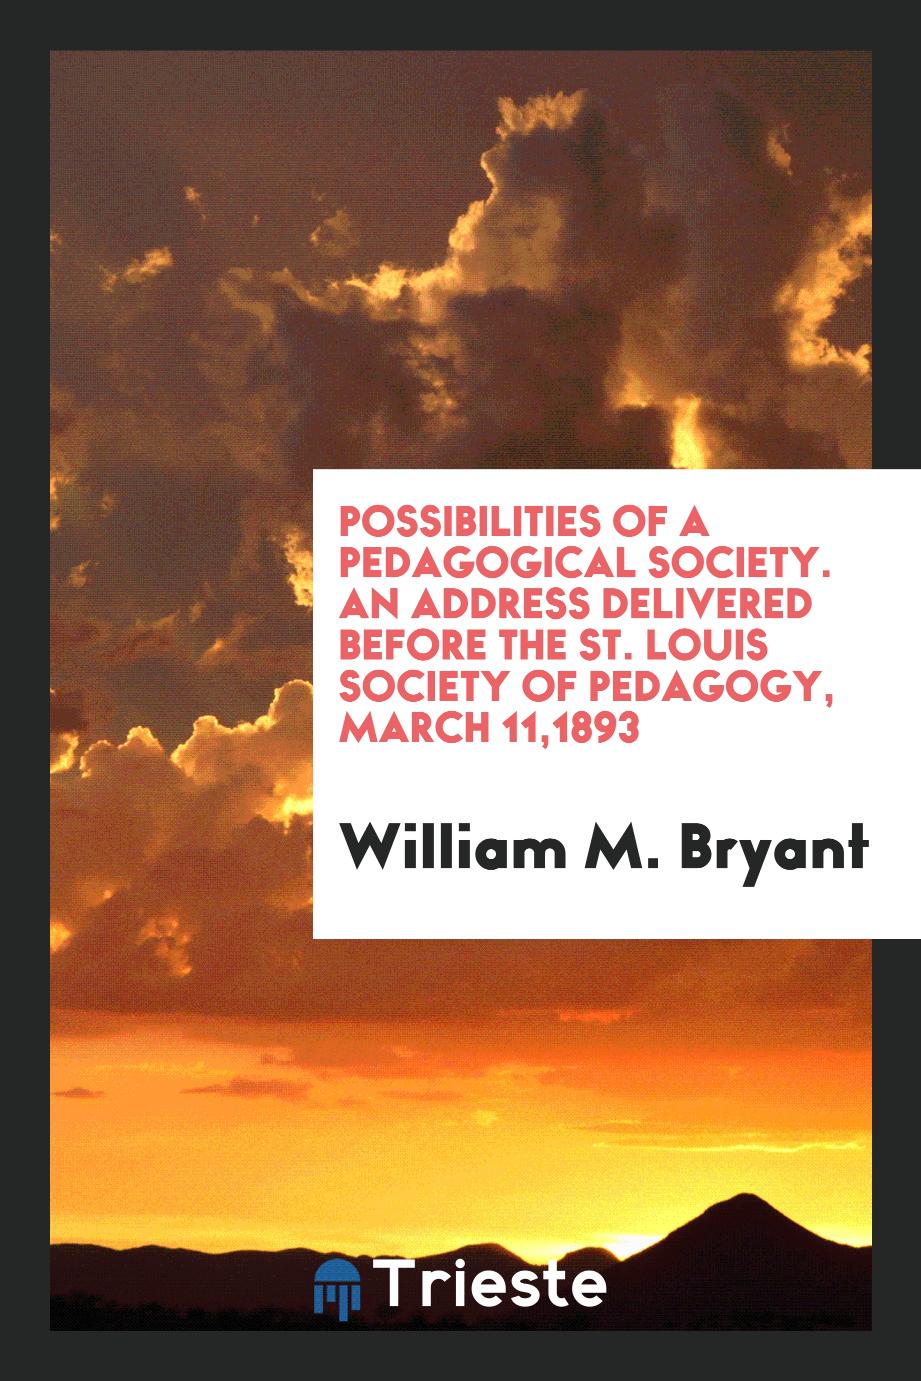 Possibilities of a Pedagogical Society. An Address Delivered Before the St. Louis Society of Pedagogy, March 11,1893